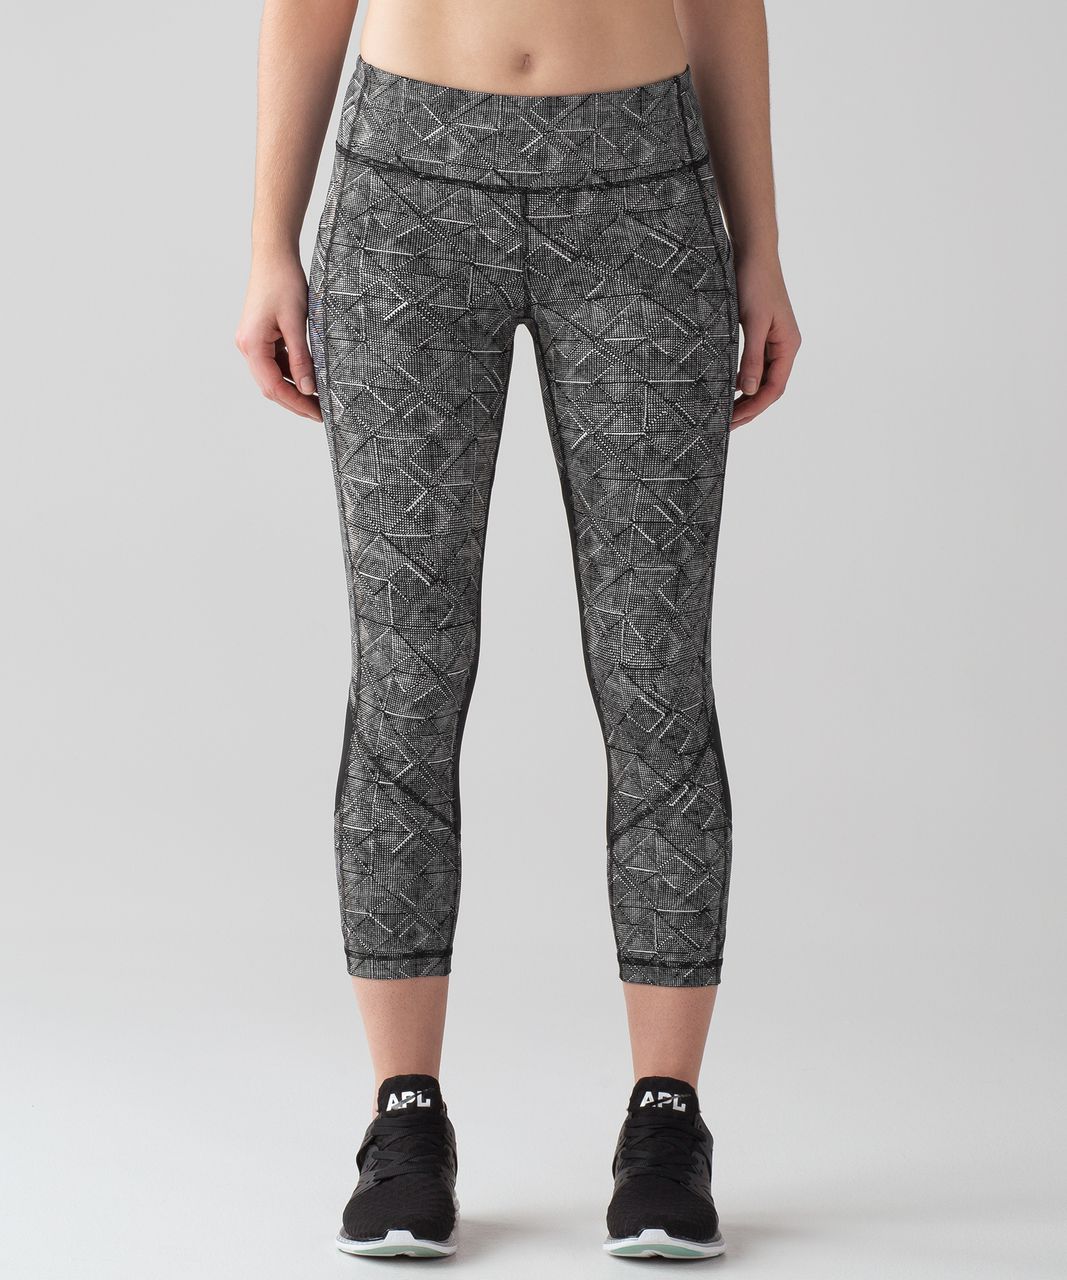 Lululemon Pace Rival High-Rise Crop 22 - Formation Camo Deep Coal Multi /  Black Size 4 - $75 (14% Off Retail) - From A